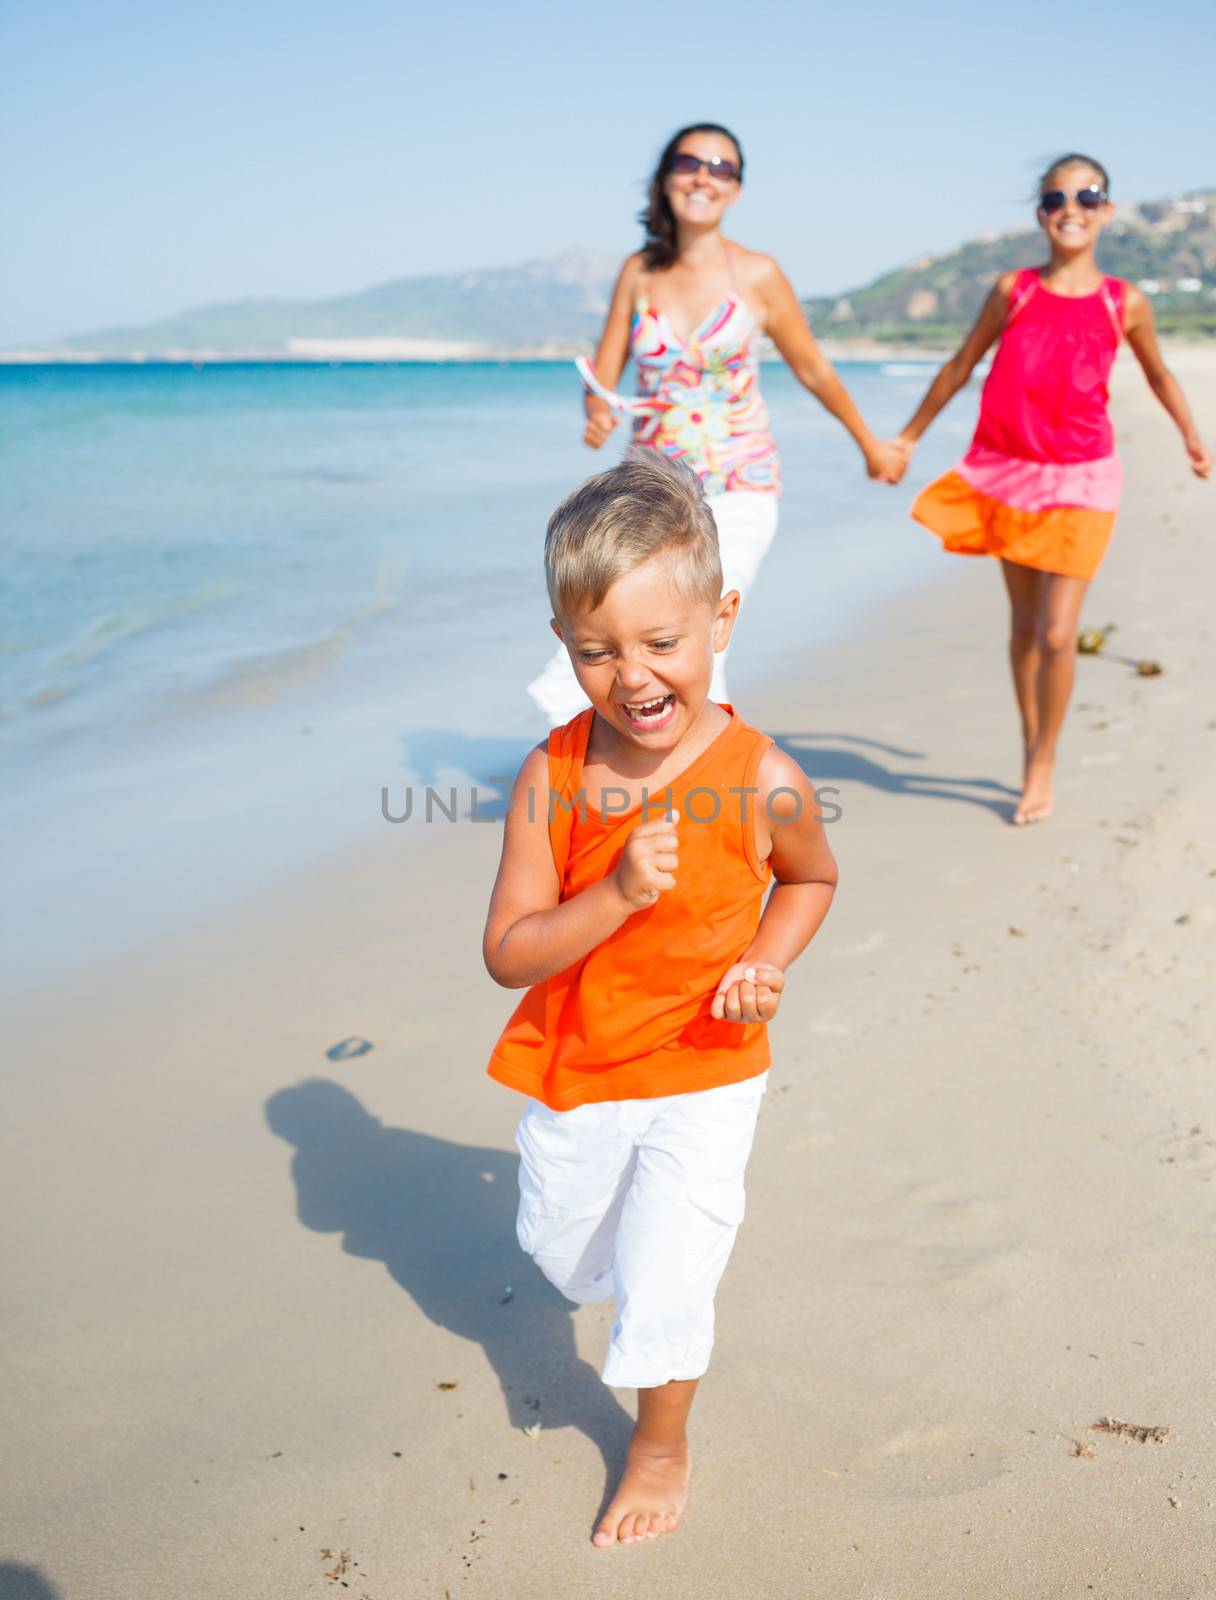 Adorable happy boy with sister and mother running on beach